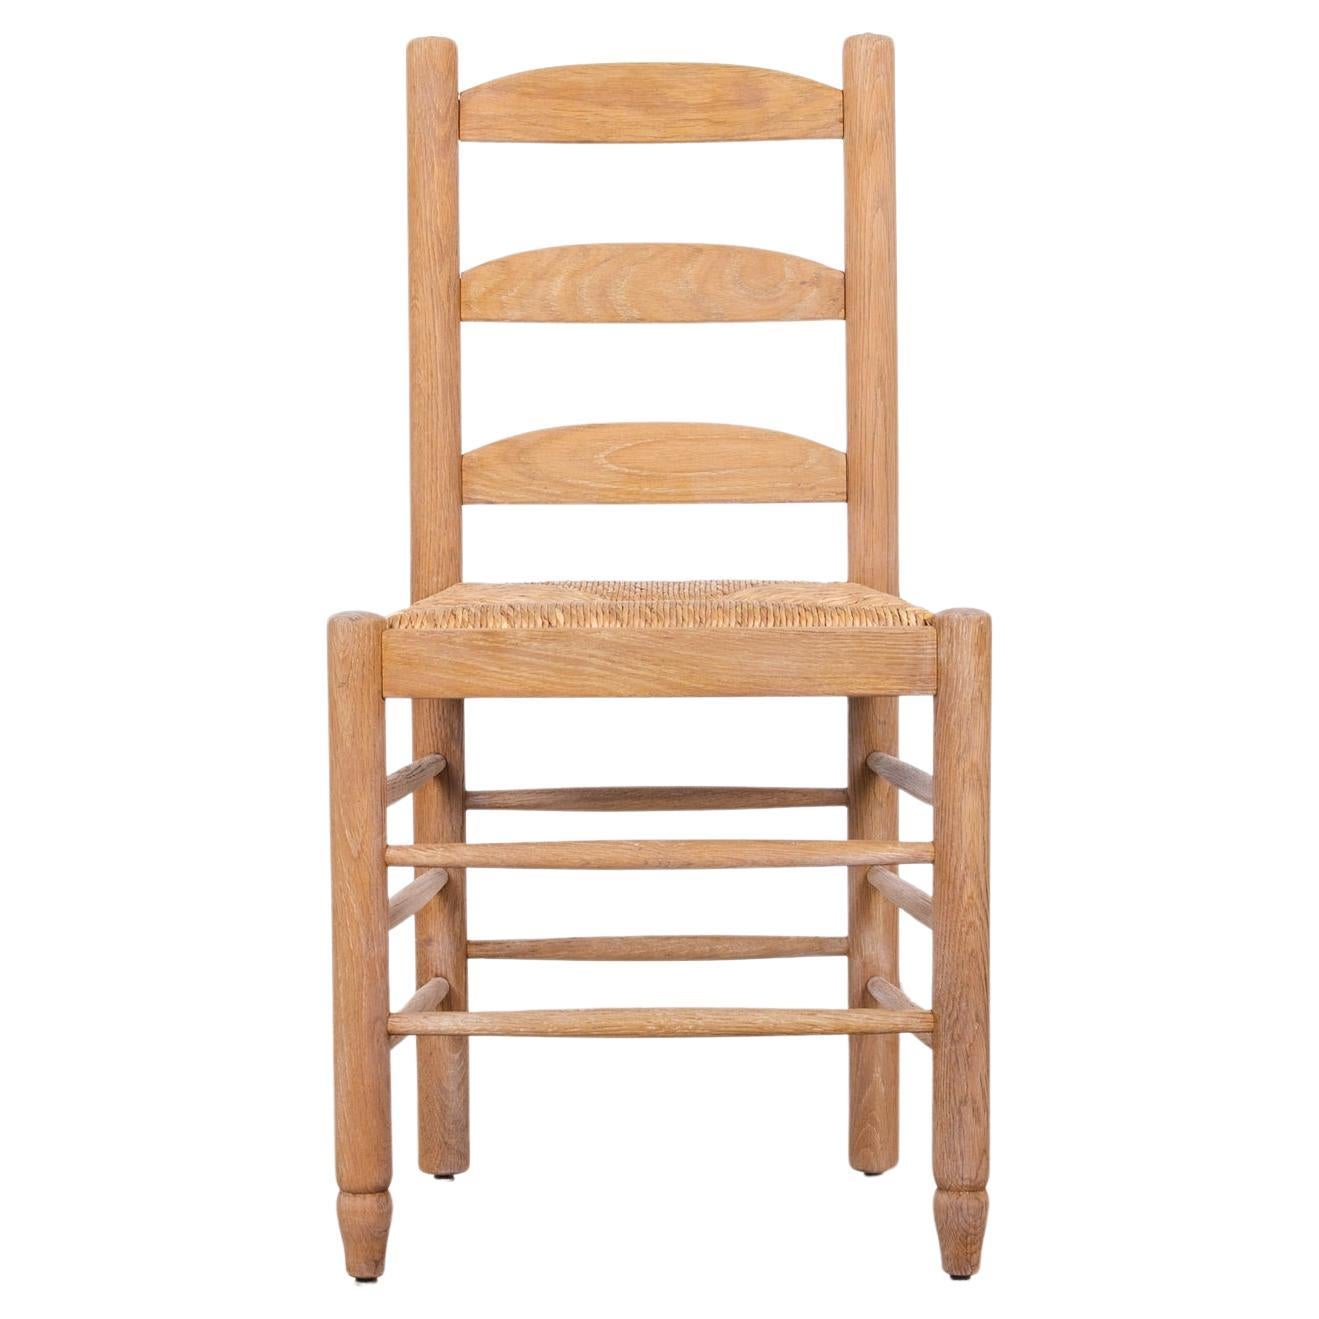 1960s Belgian Bleached Oak Dining Chair For Sale